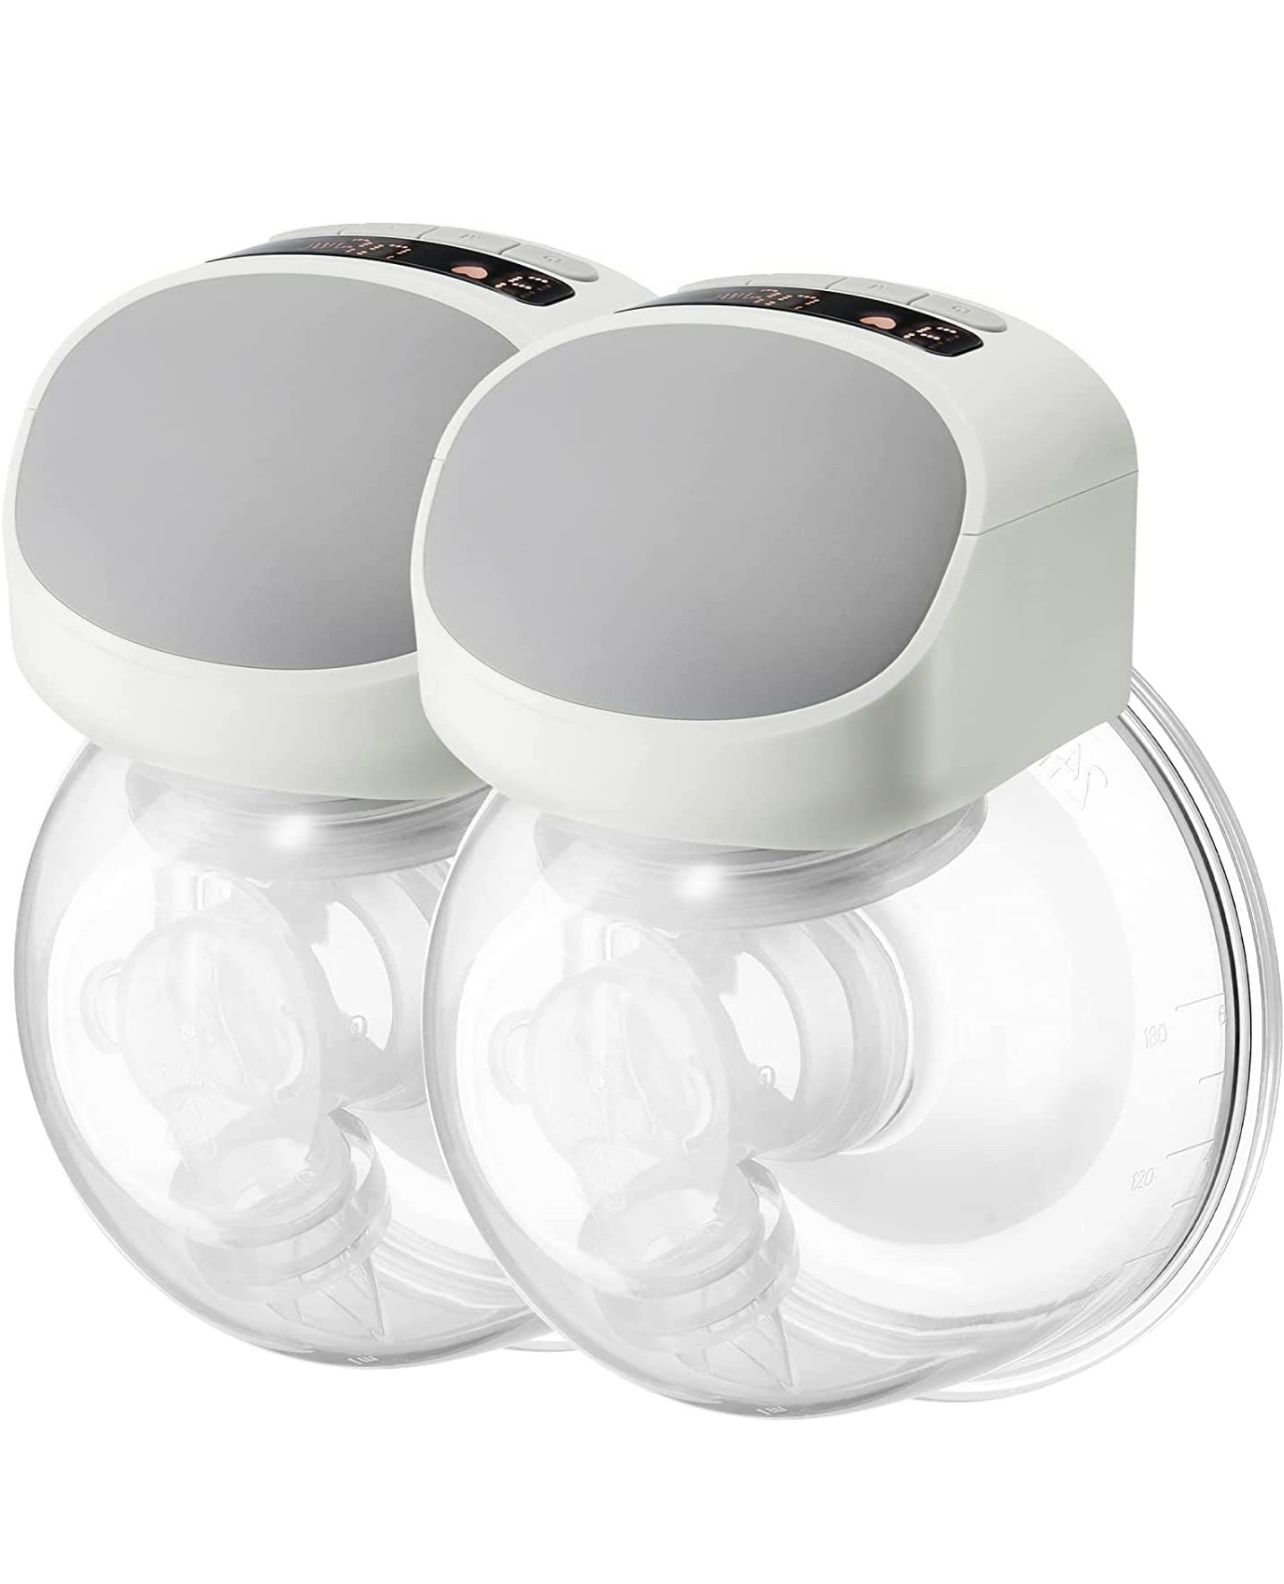 2 Packs Wearable Breast Pump, Double Hands Free Electric S10 Pro, Wireless Breast Feeding Pump with 2 Modes, 9 Levels, LCD Display and Memory Function